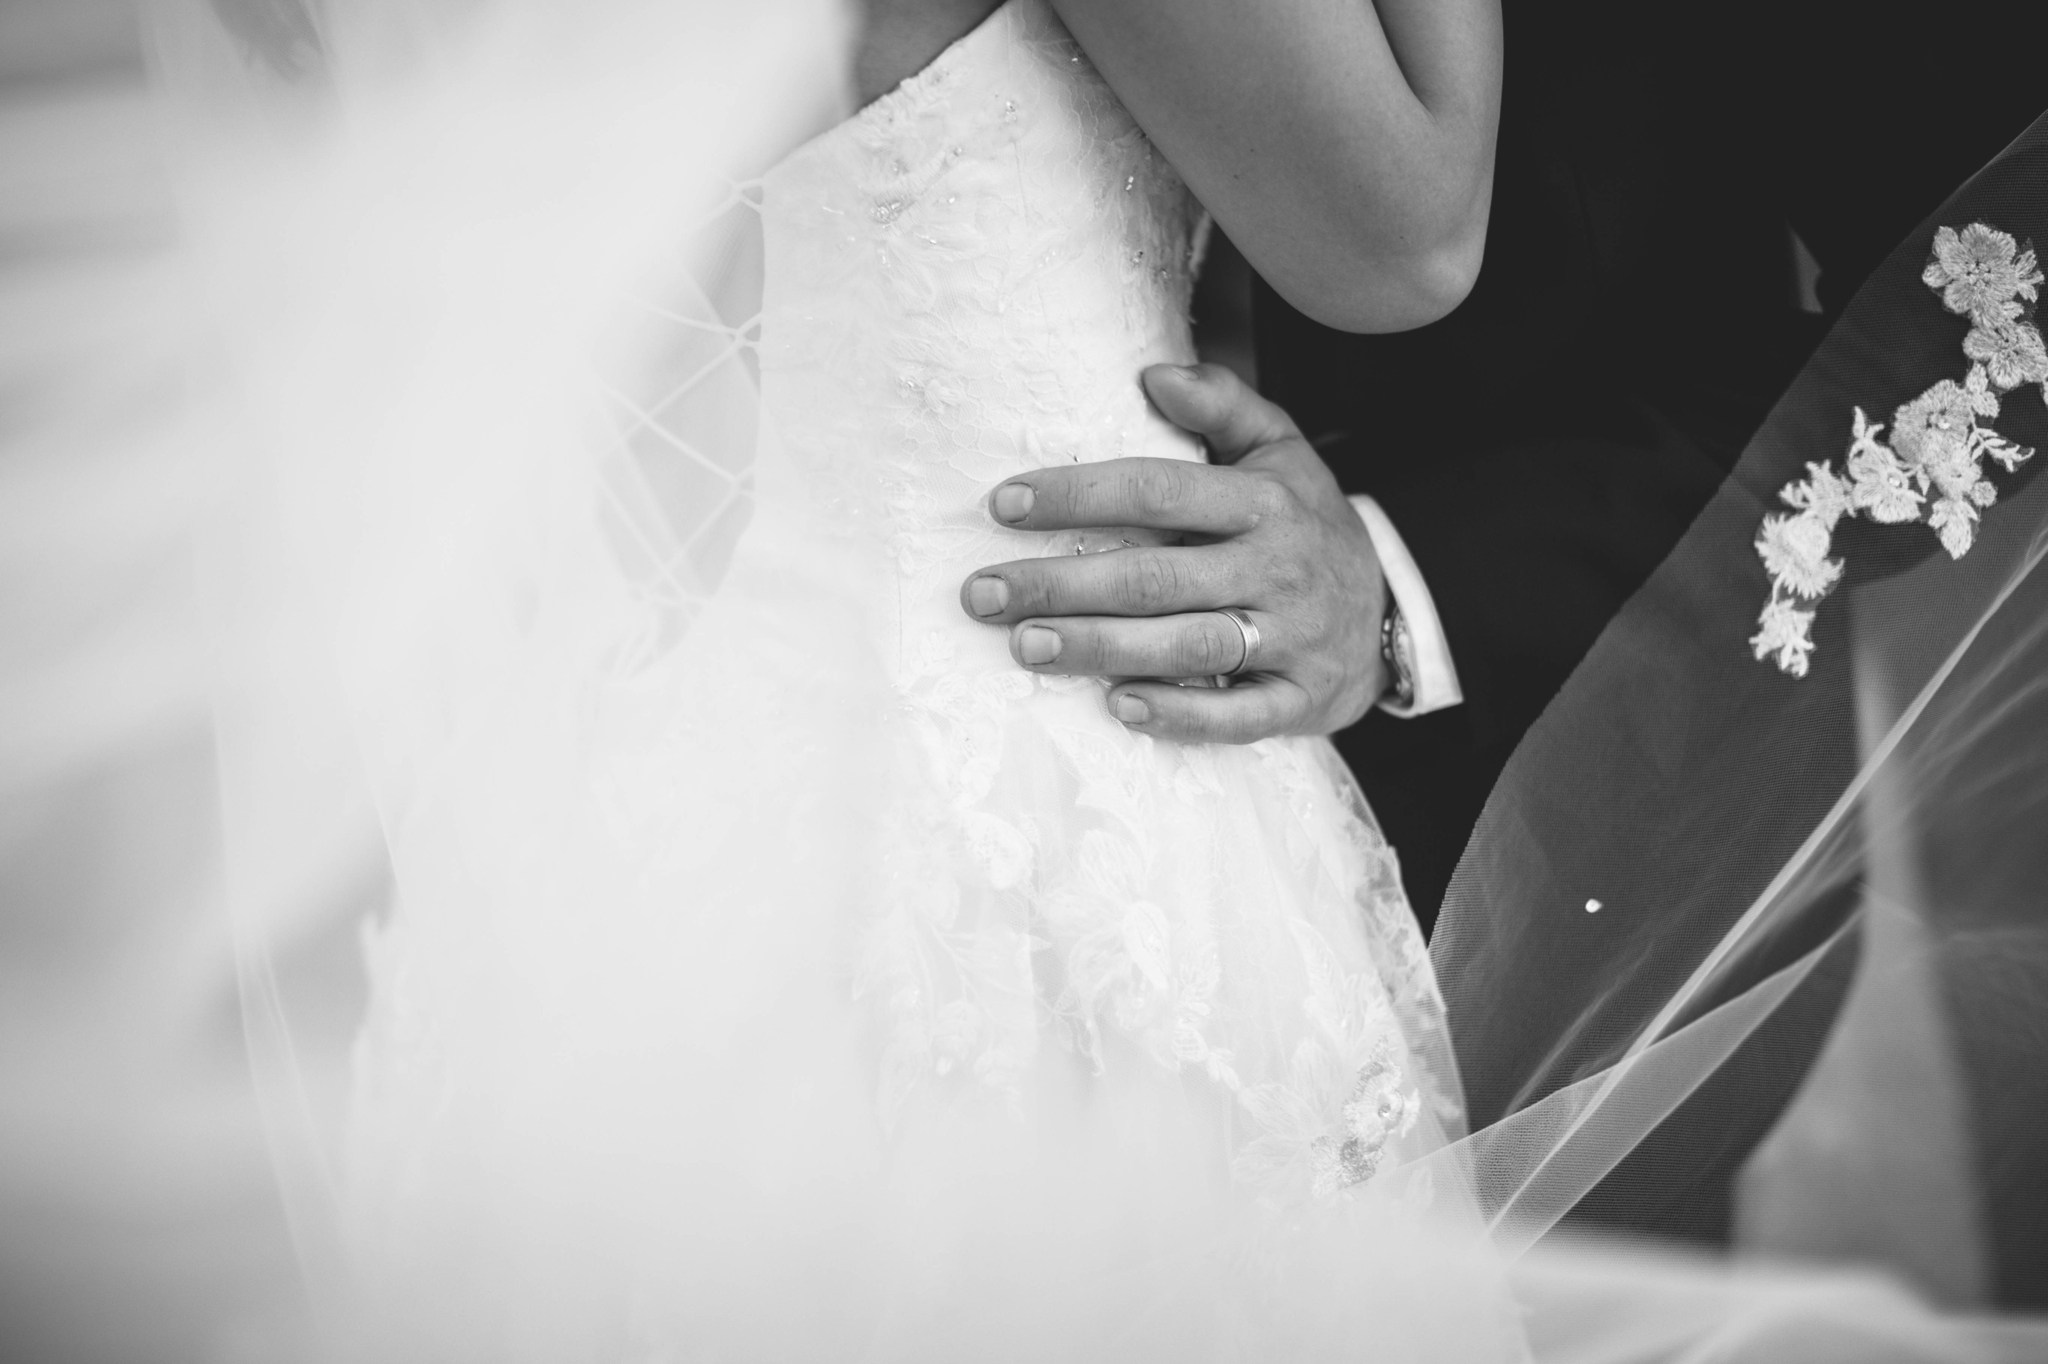  Black and white Veil shot - Wedding Portraits on the front porch of an all white luxury estate - Bride is wearing a Aline Ballgown by Cherish by Southern Bride with a long cathedral veil - Groom is wearing a black suit by Generation Tux and has a ma